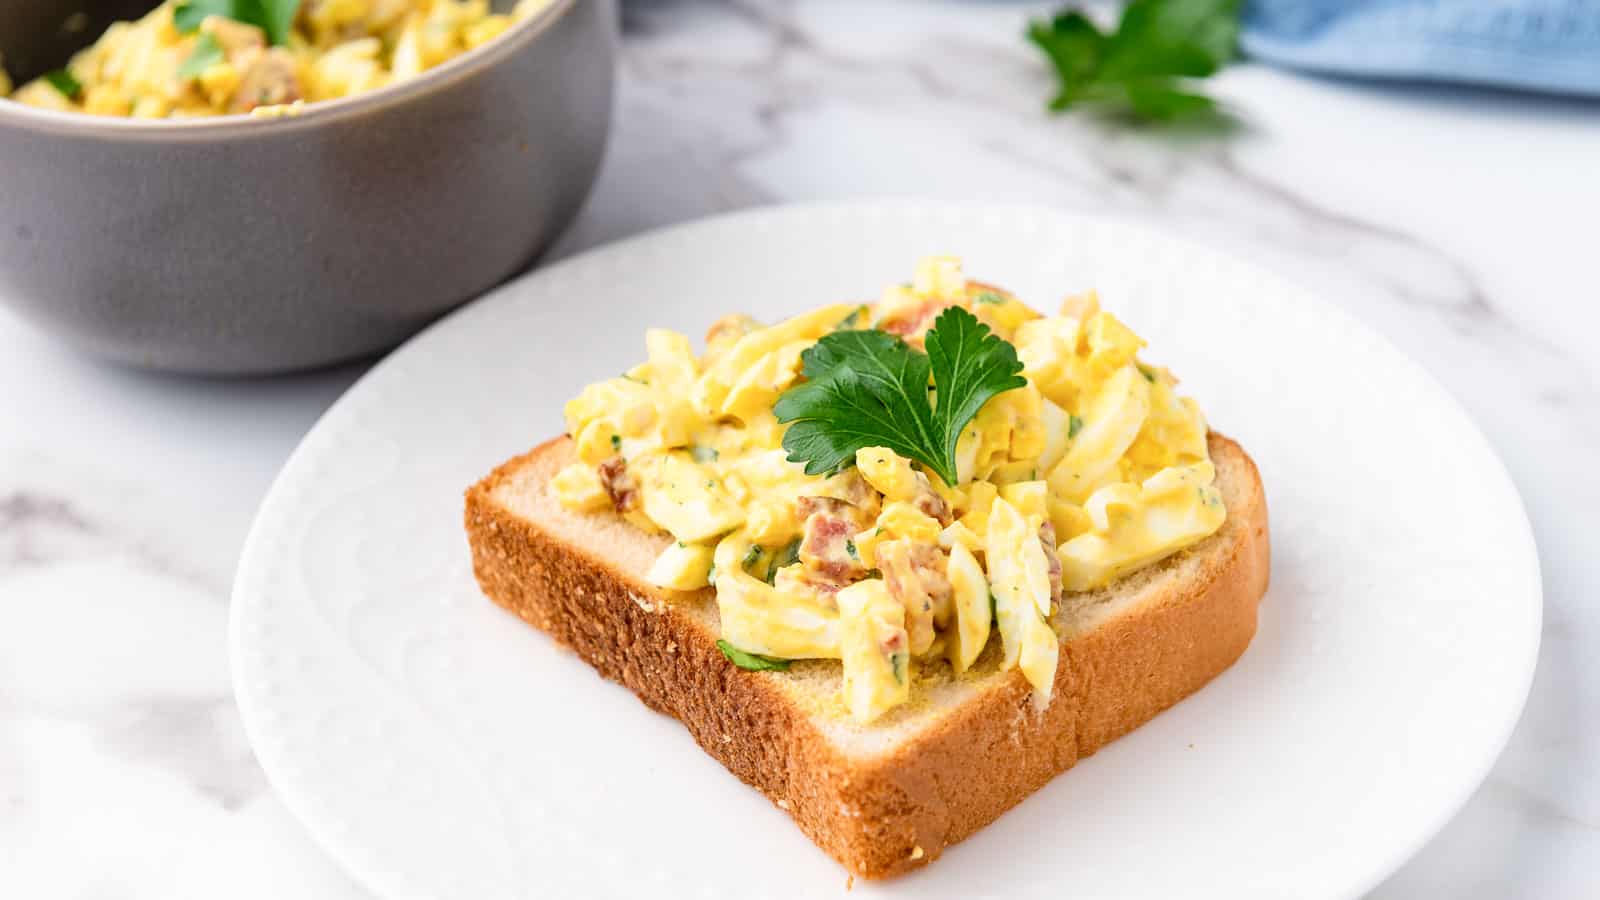 Egg salad on a piece of white bread.